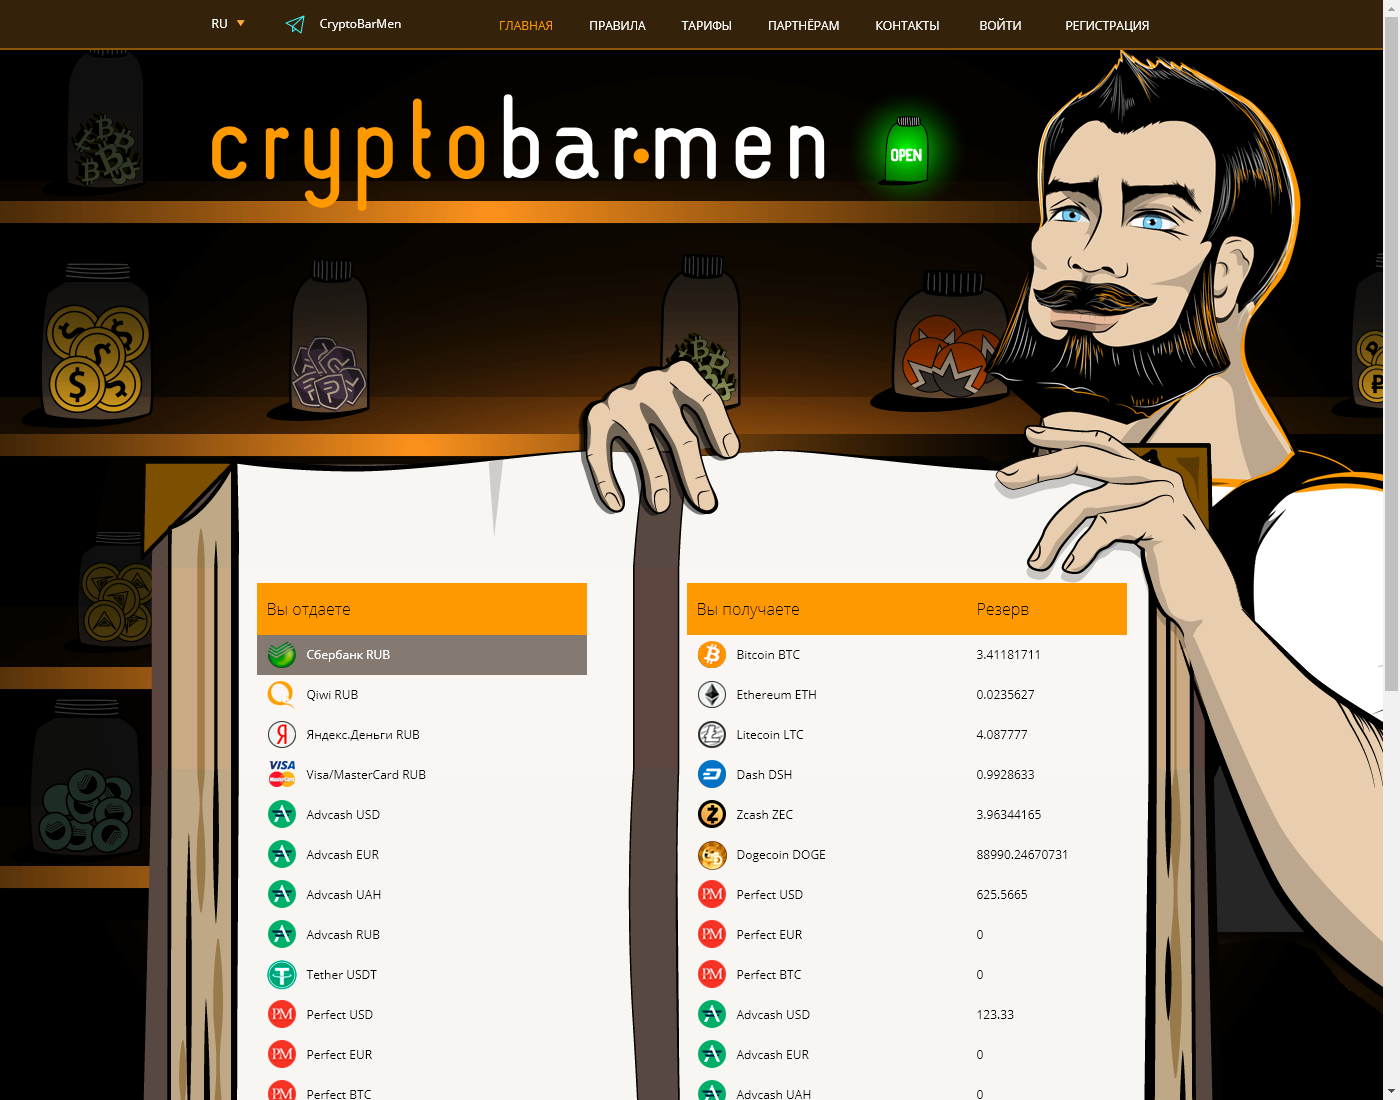 CryptoBanMen user interface: the home page in English